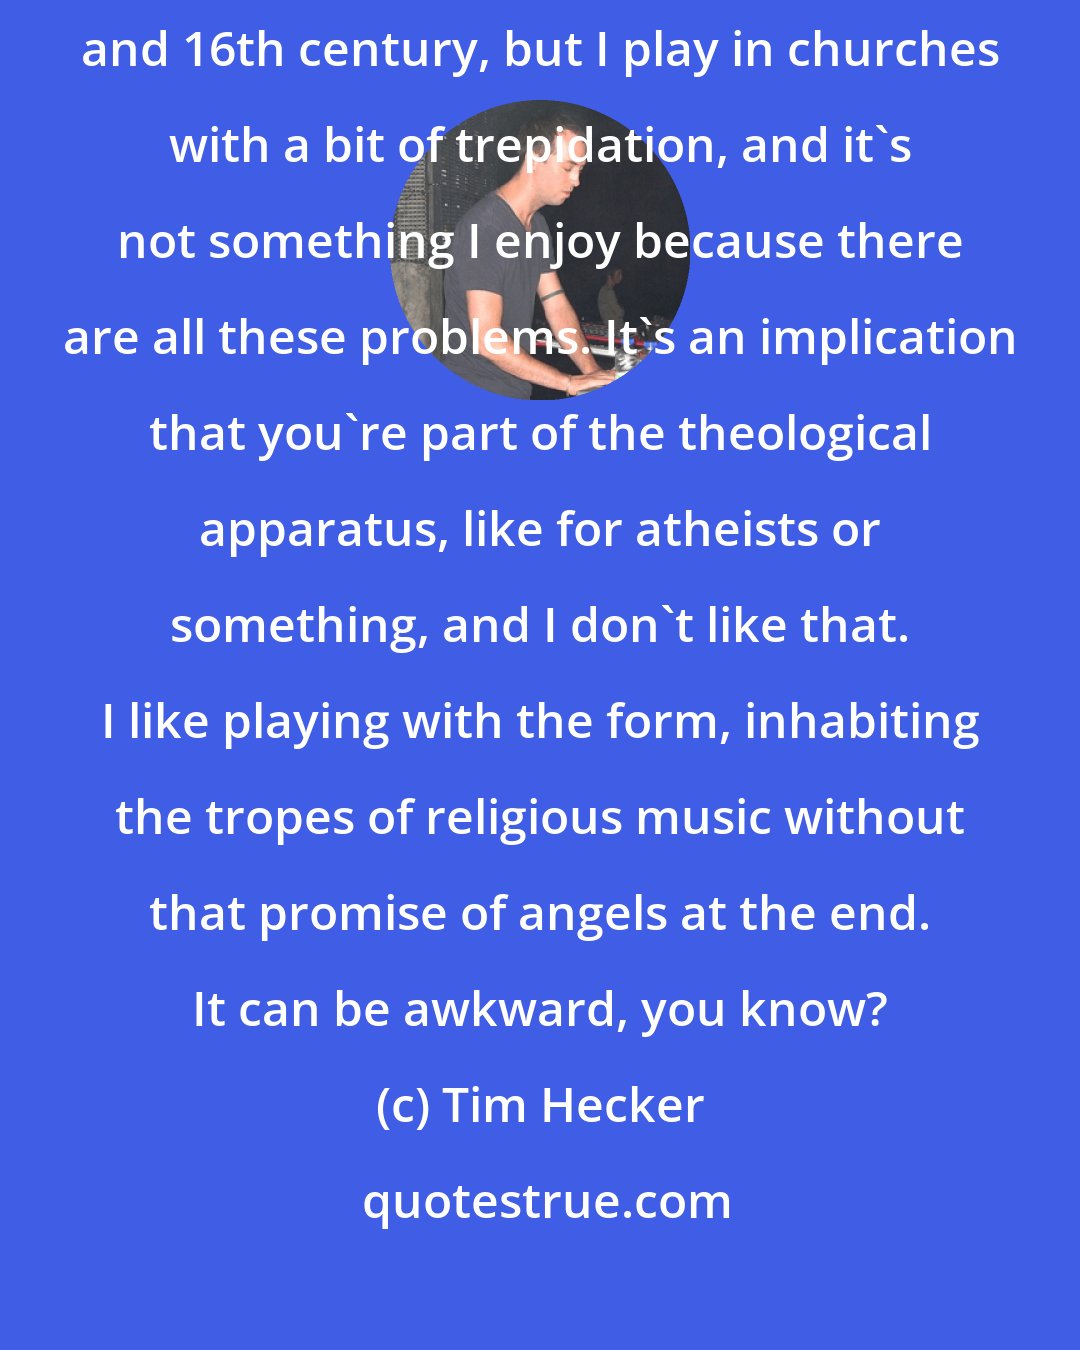 Tim Hecker: I definitely enjoy liturgical work and choral work from the 15th century and 16th century, but I play in churches with a bit of trepidation, and it's not something I enjoy because there are all these problems. It's an implication that you're part of the theological apparatus, like for atheists or something, and I don't like that. I like playing with the form, inhabiting the tropes of religious music without that promise of angels at the end. It can be awkward, you know?